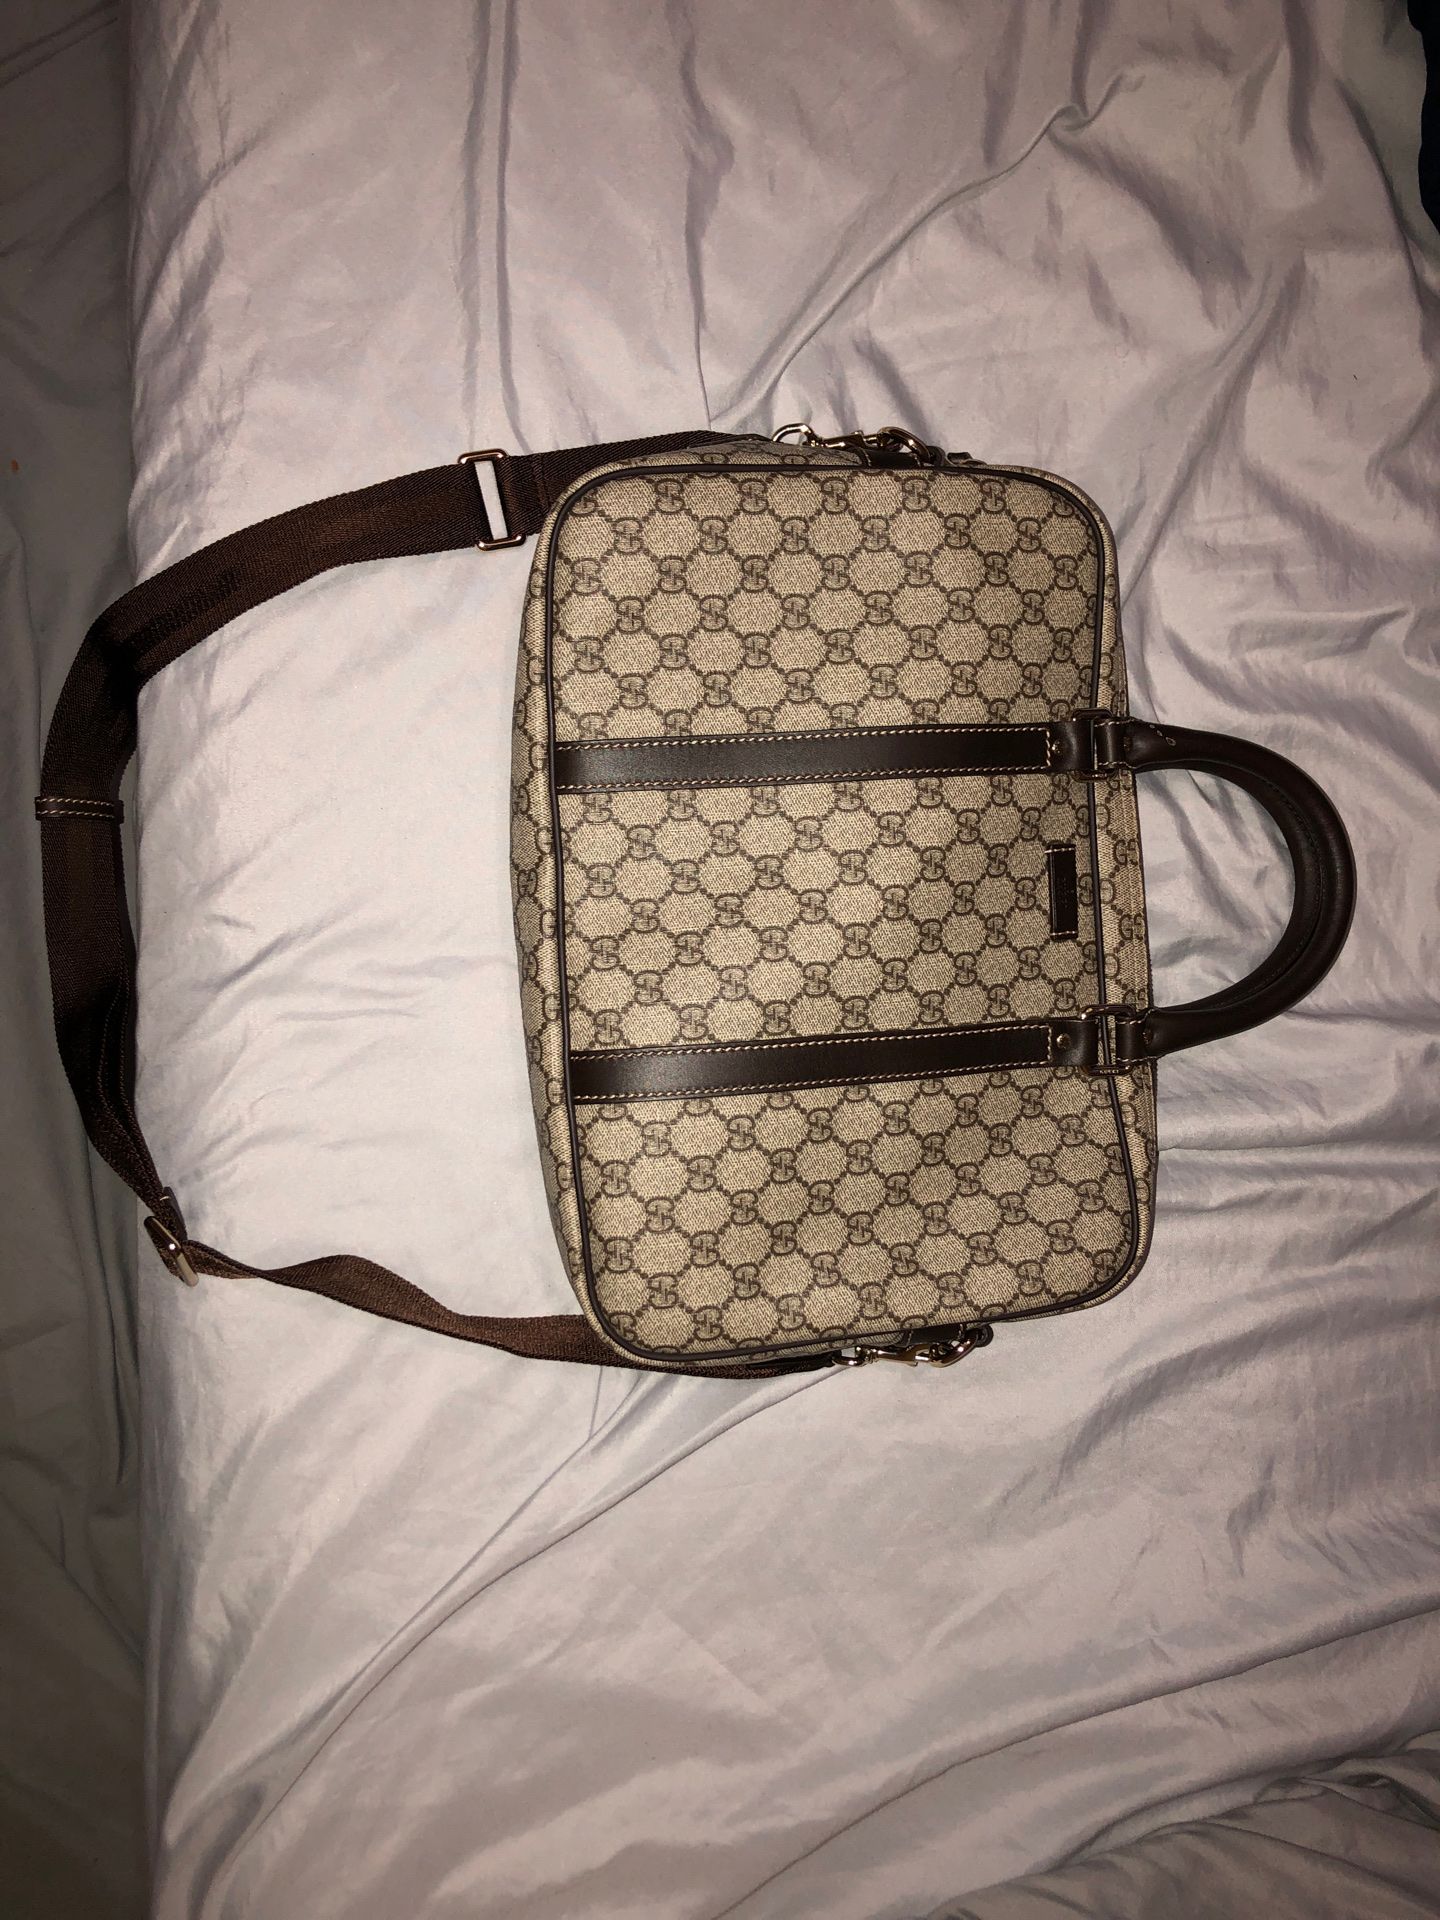 Gucci purse (purse/handbag) brown and beige with leather handles and fabric shoulder strap (dust bag included)